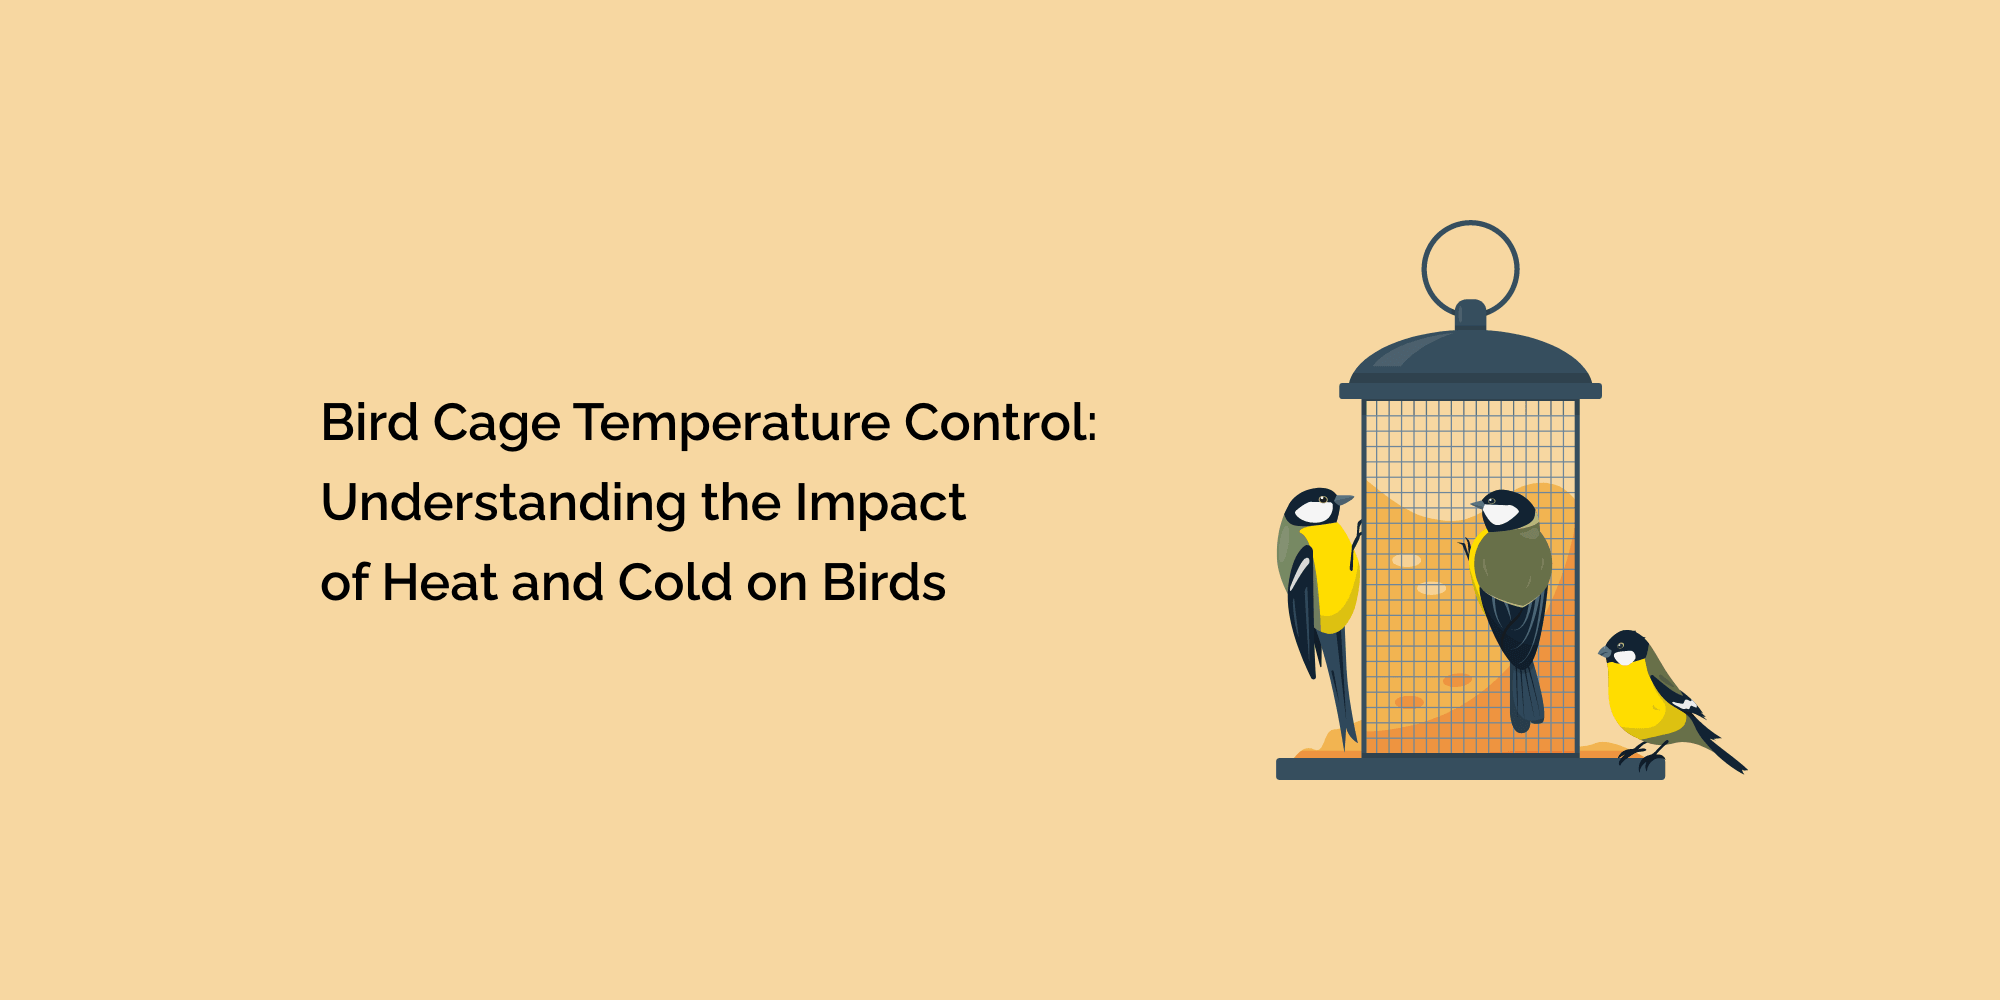 Bird Cage Temperature Control: Understanding the Impact of Heat and Cold on Birds